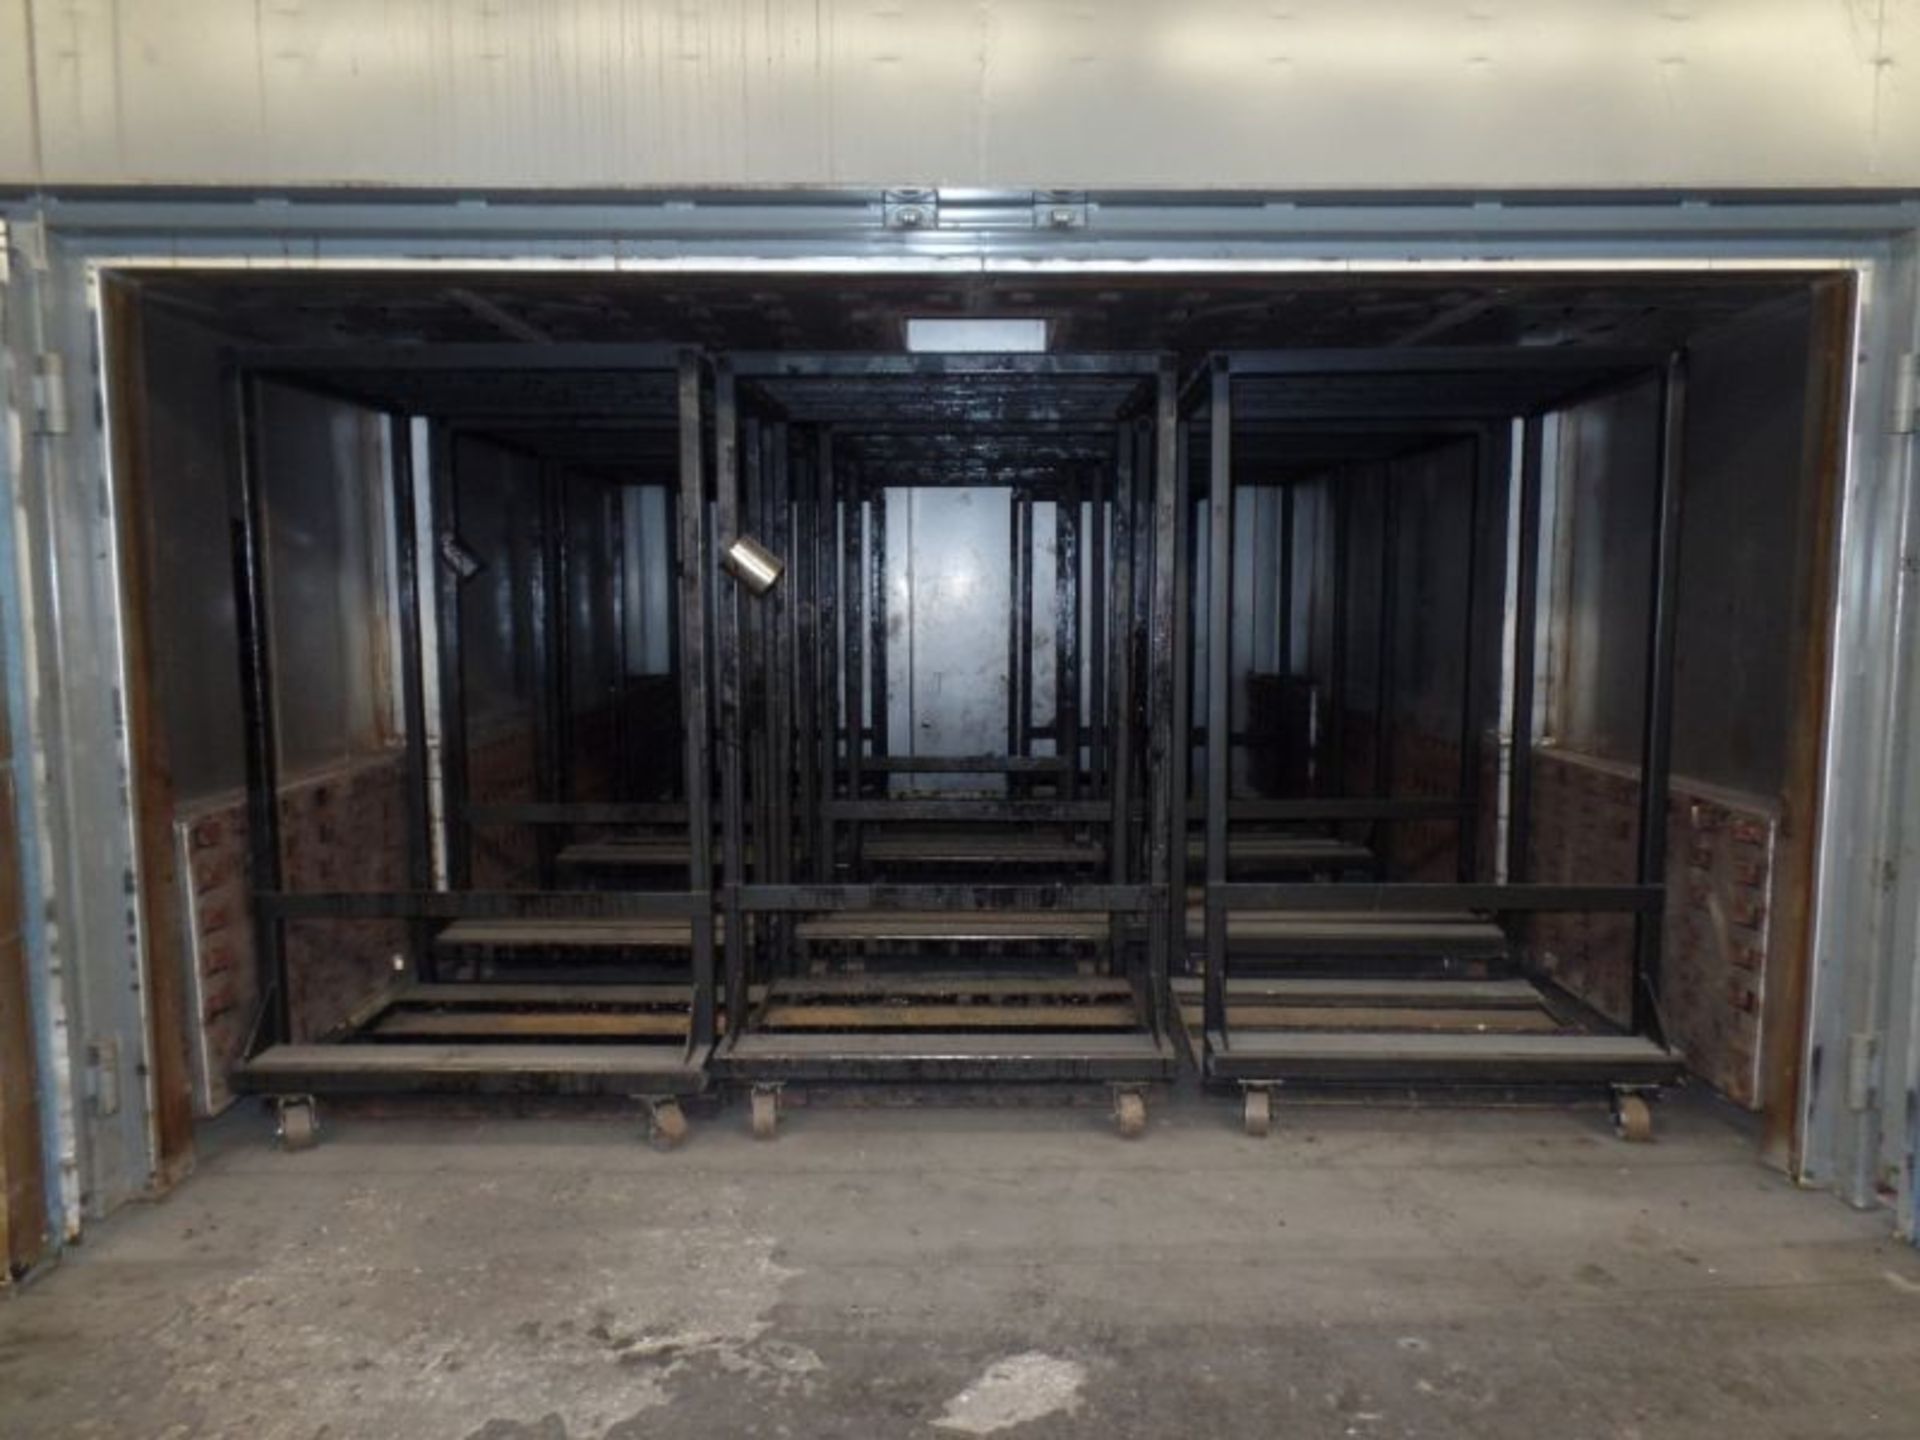 Wisconsin Oven Batch-12/18/6.5/EP Walk-In Oven, 500 Degree Max Temp. Natural Gas, New 2019 - Image 6 of 8